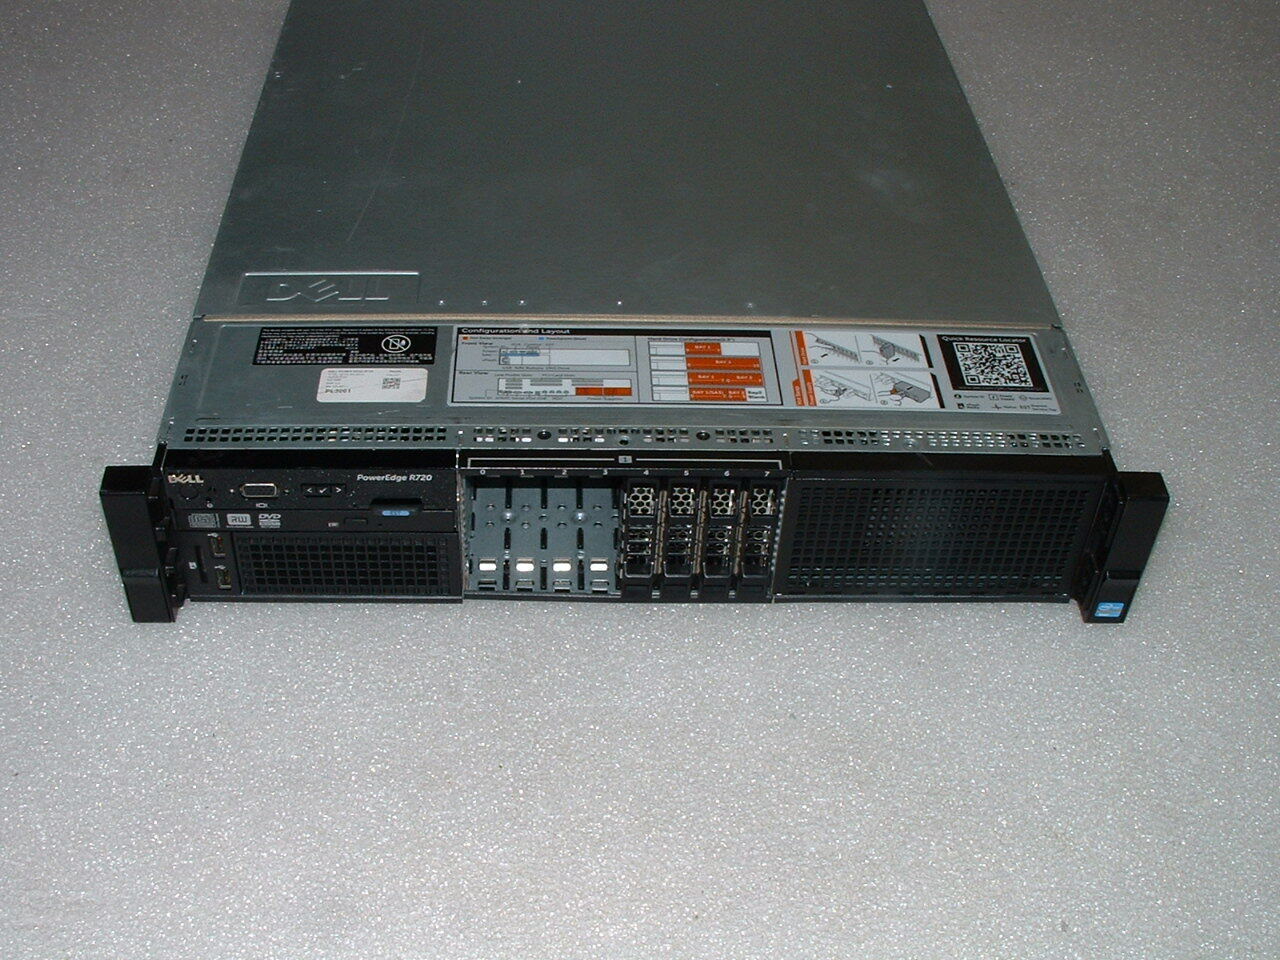 Dell Poweredge R720 2x Xeon E5-2670 v2 2.5GHz 20-Cores / No RAM or HDD / H710